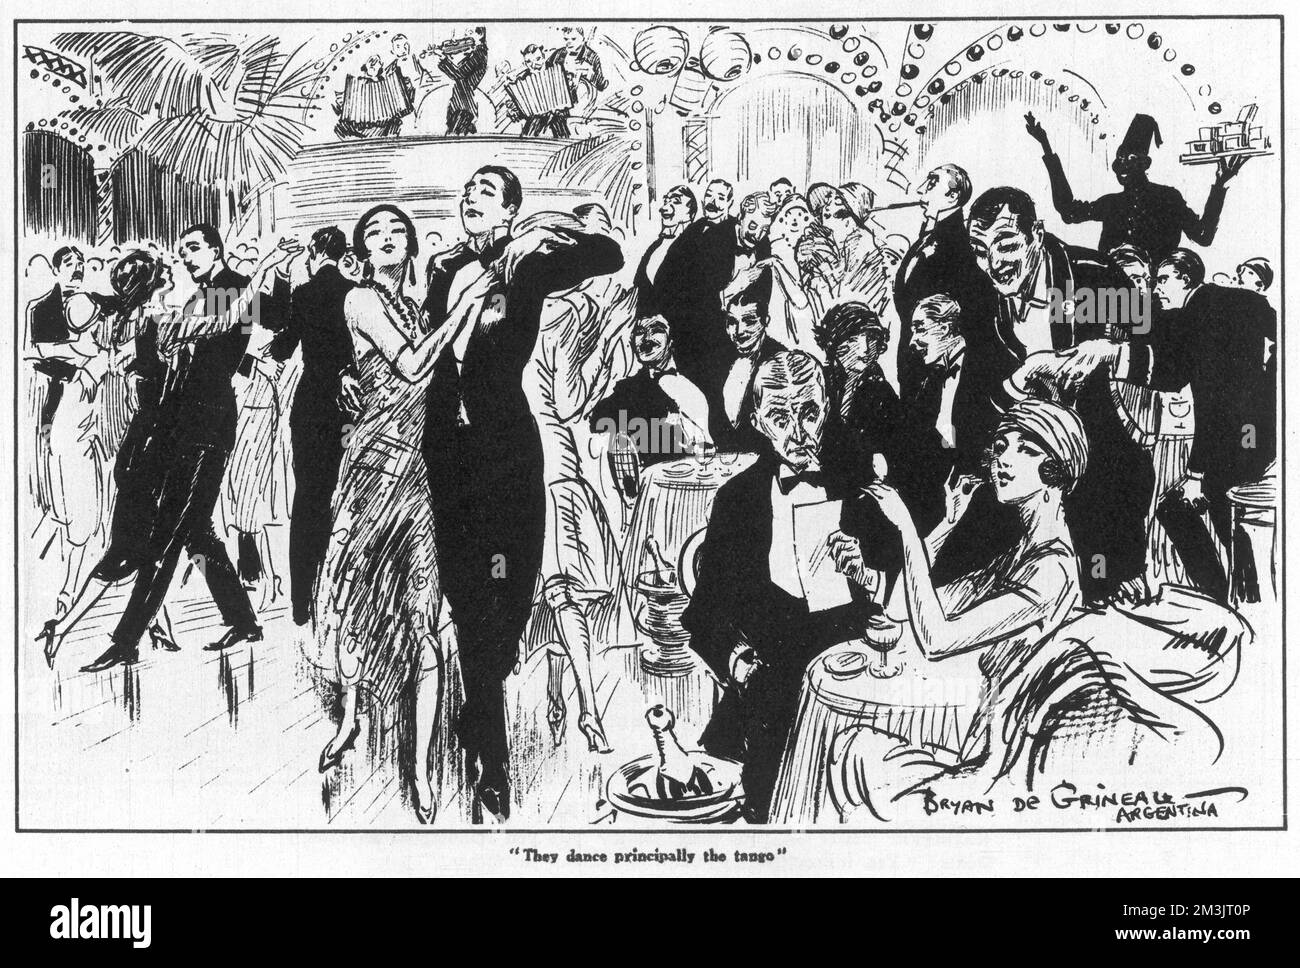 Nightlife in Buenos Aires, Argentina.  In a club, dancers are dancing the tango while onlookers sit at tables attended by waiters.     Date: 1925 Stock Photo